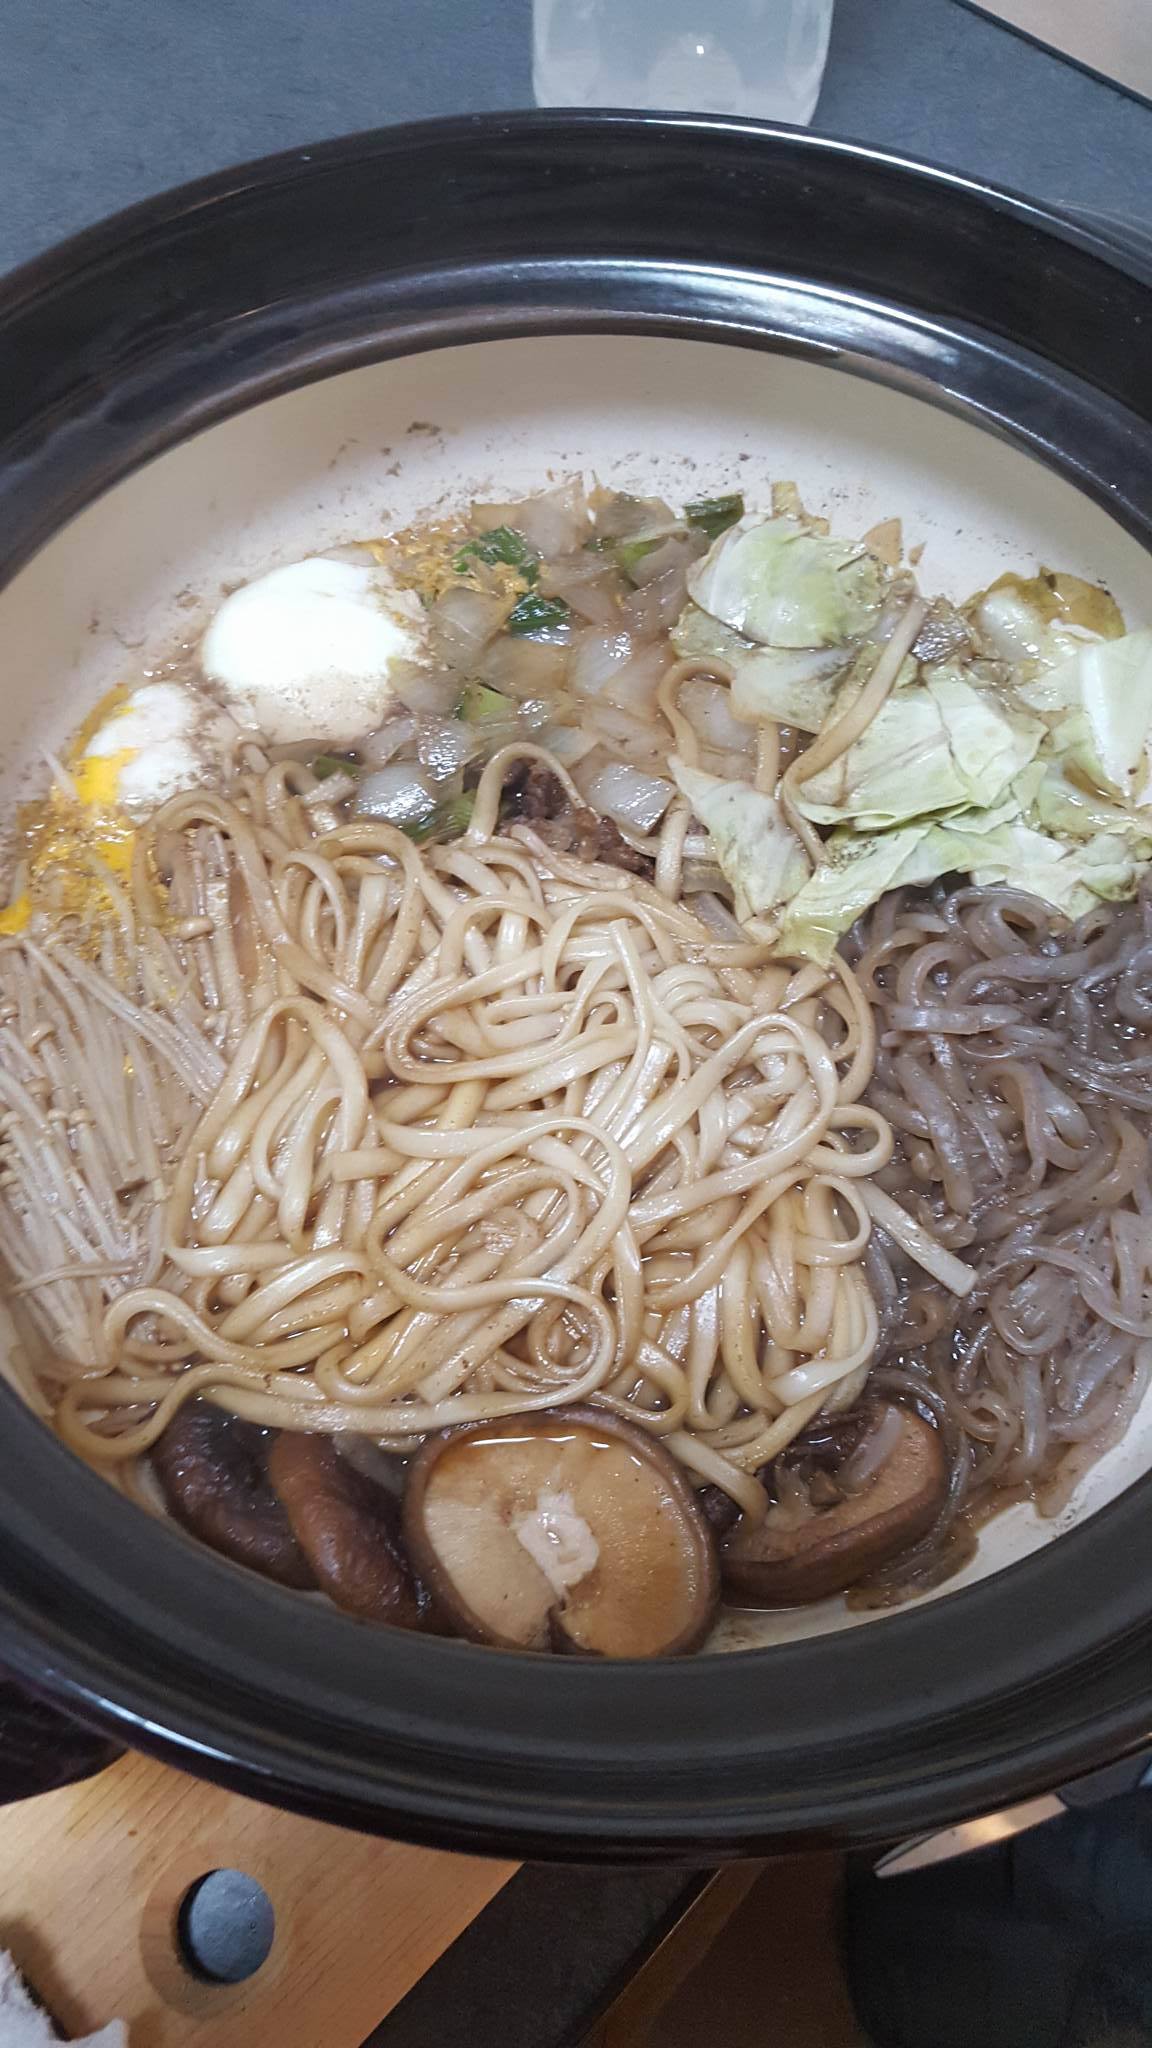 The magical Nabe Hot Pot that Joshua made. Oh myy!